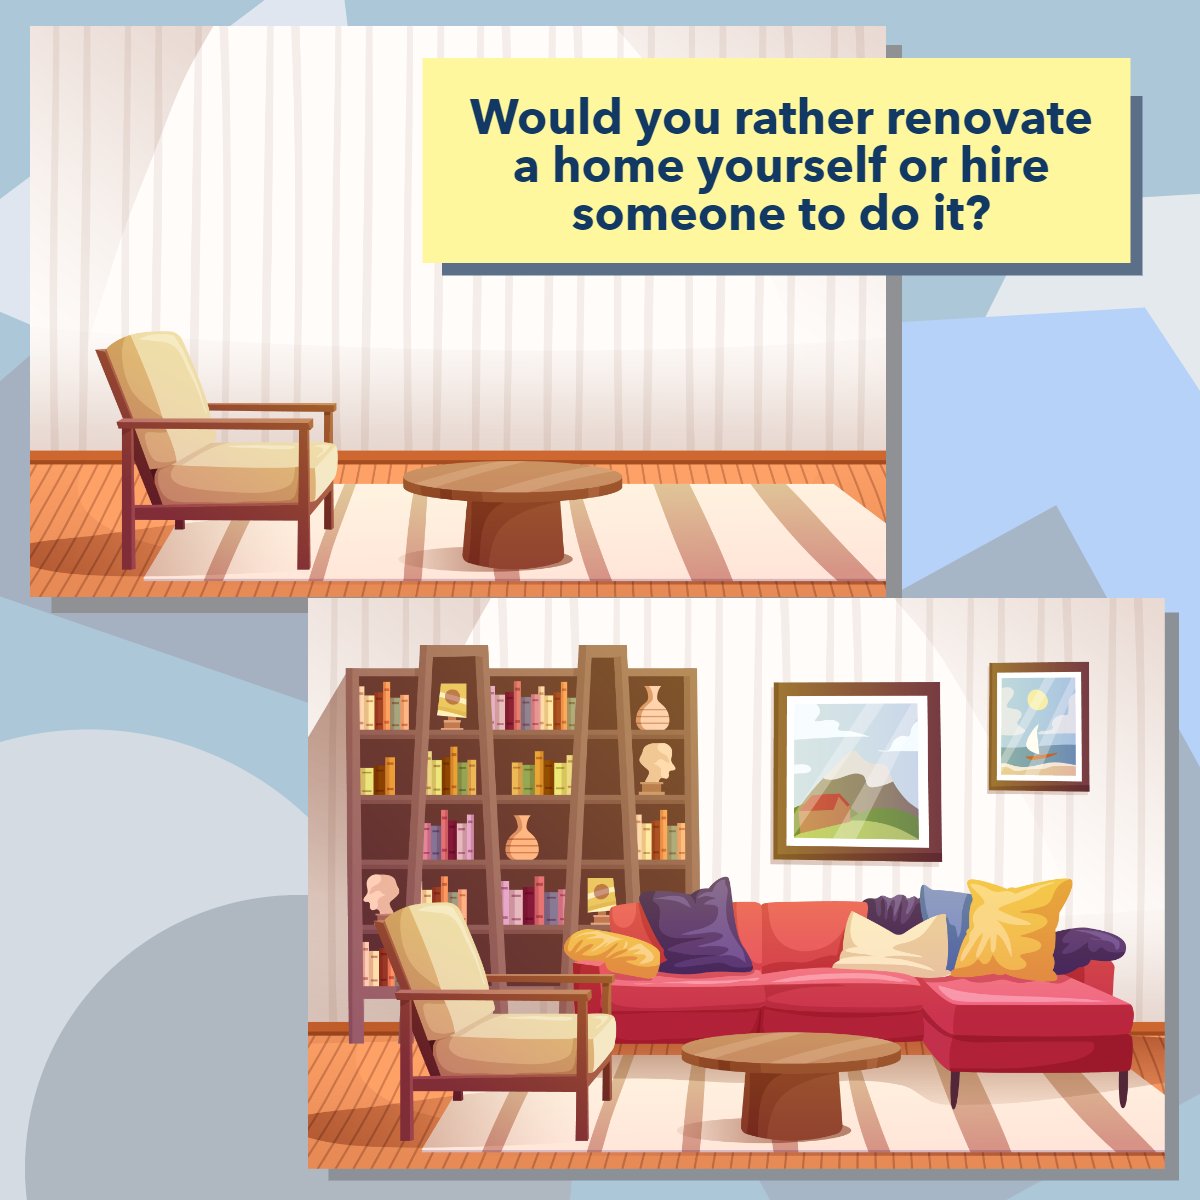 Would you do your dream renovation project yourself or hire someone?

Let us know below!

#HomeRenovation #DIYHome